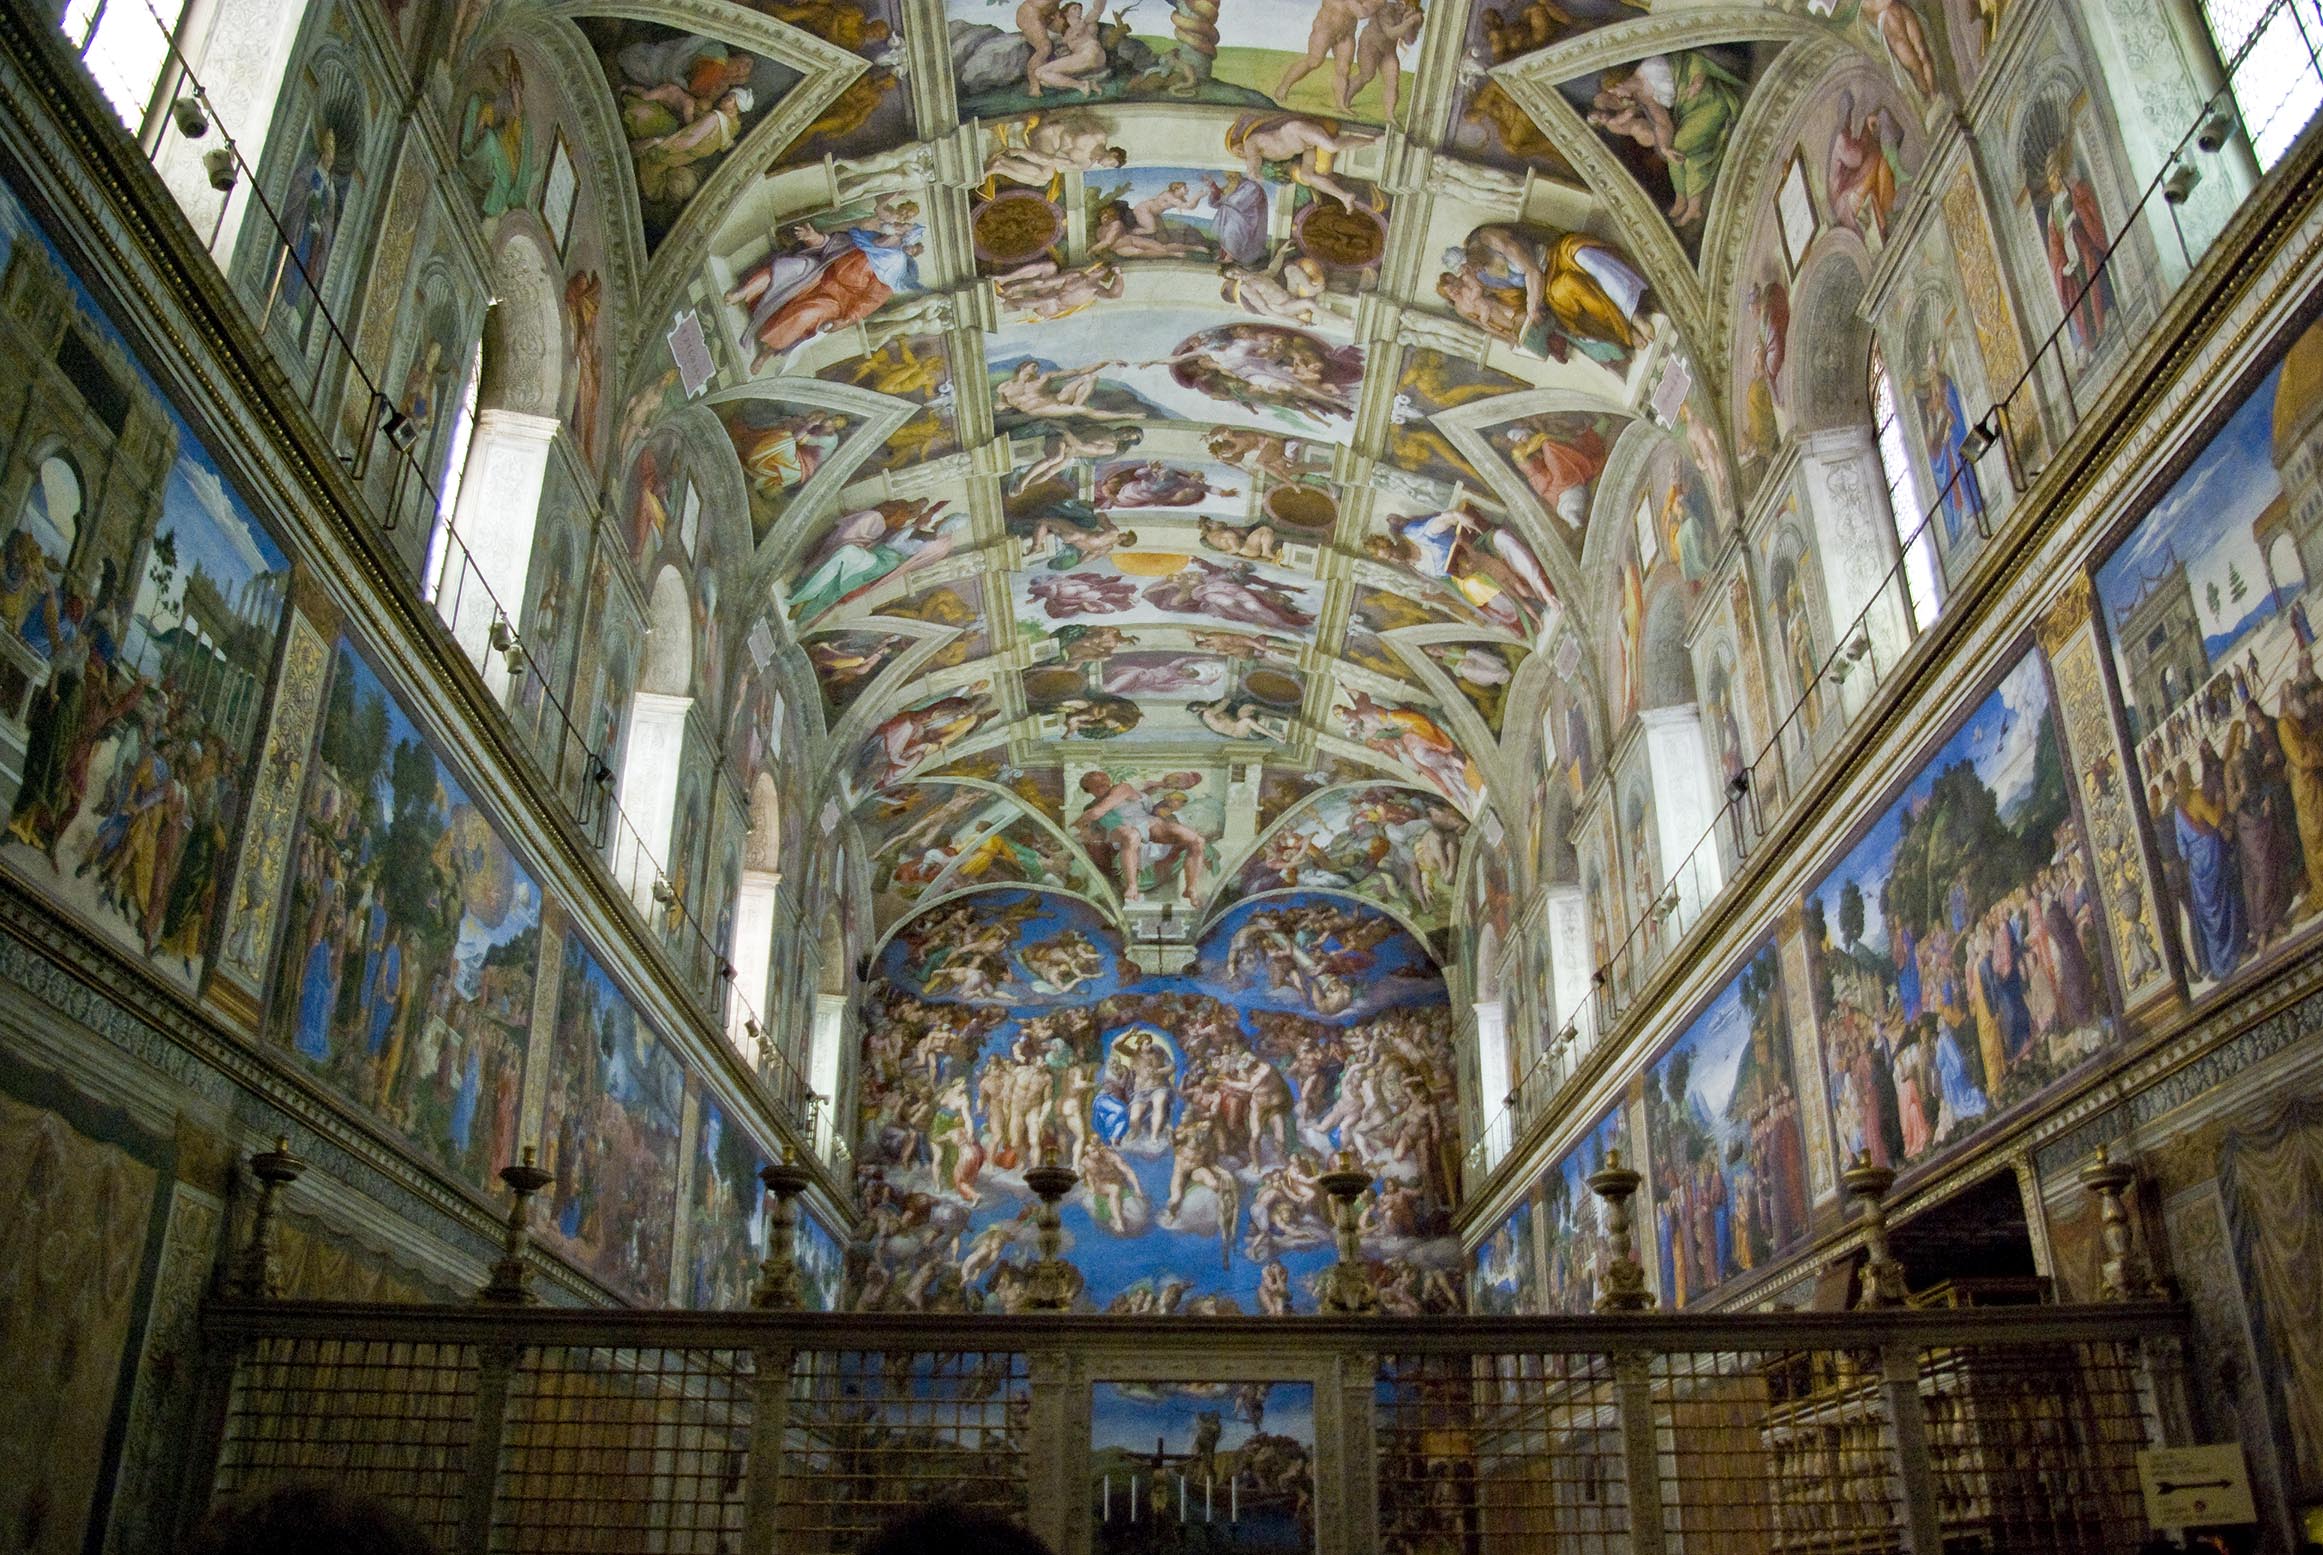 Michelangelo and the Secrets of the Sistine Chapel”